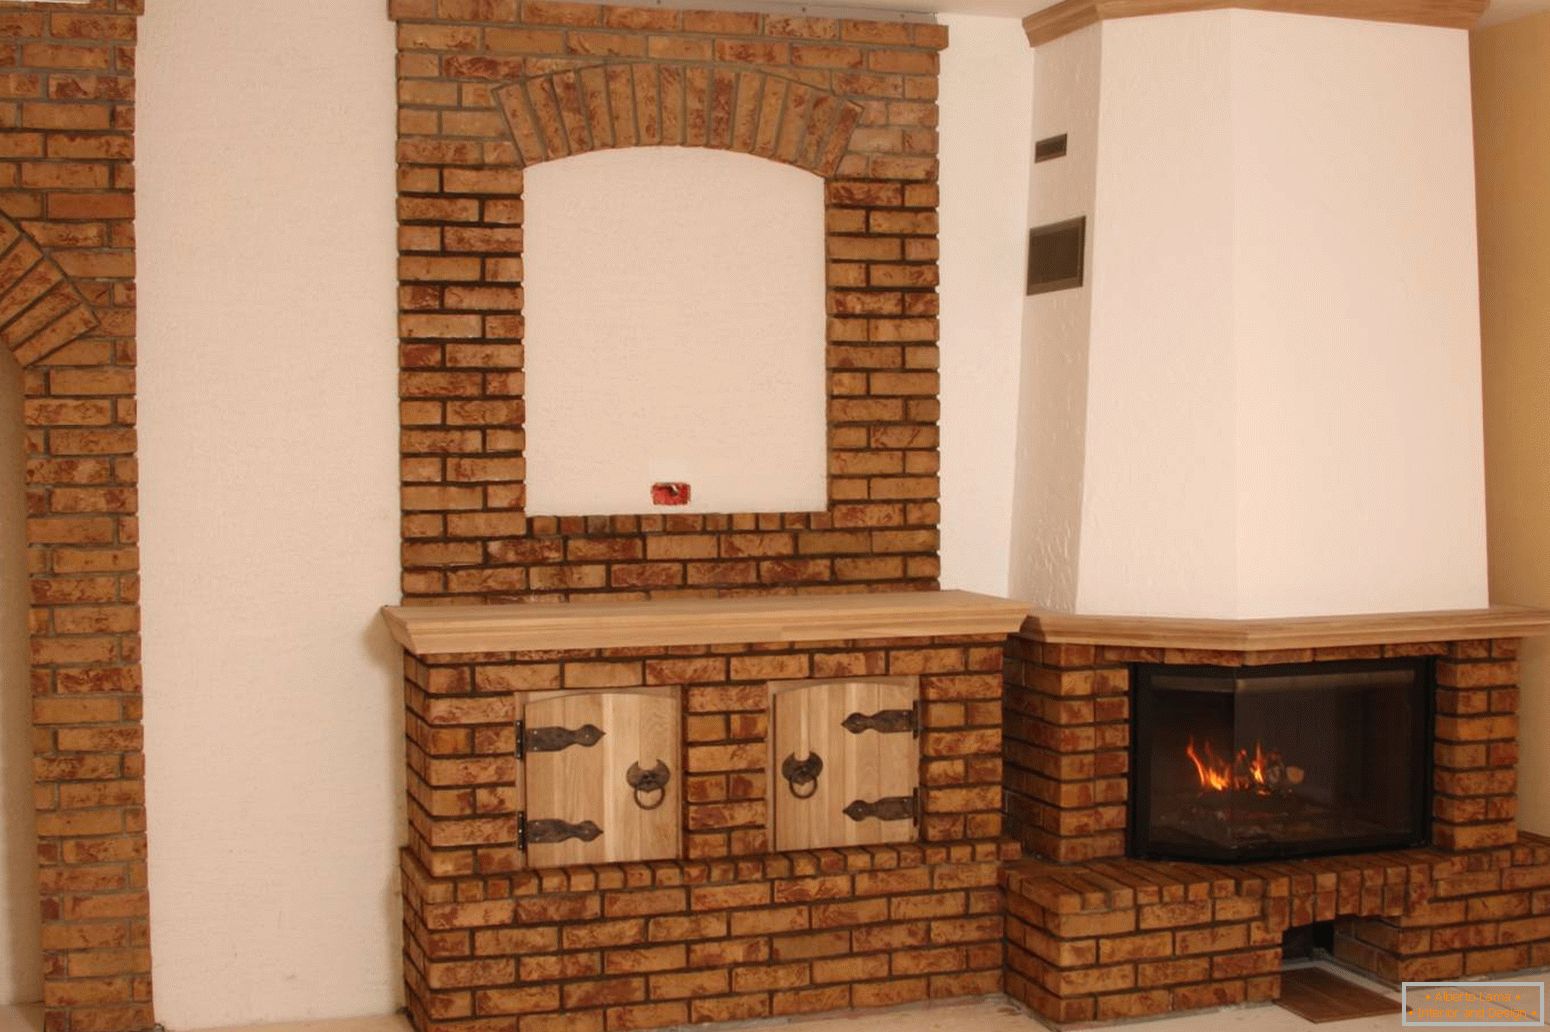 Electric fireplace in stone decoration in a cozy living room.